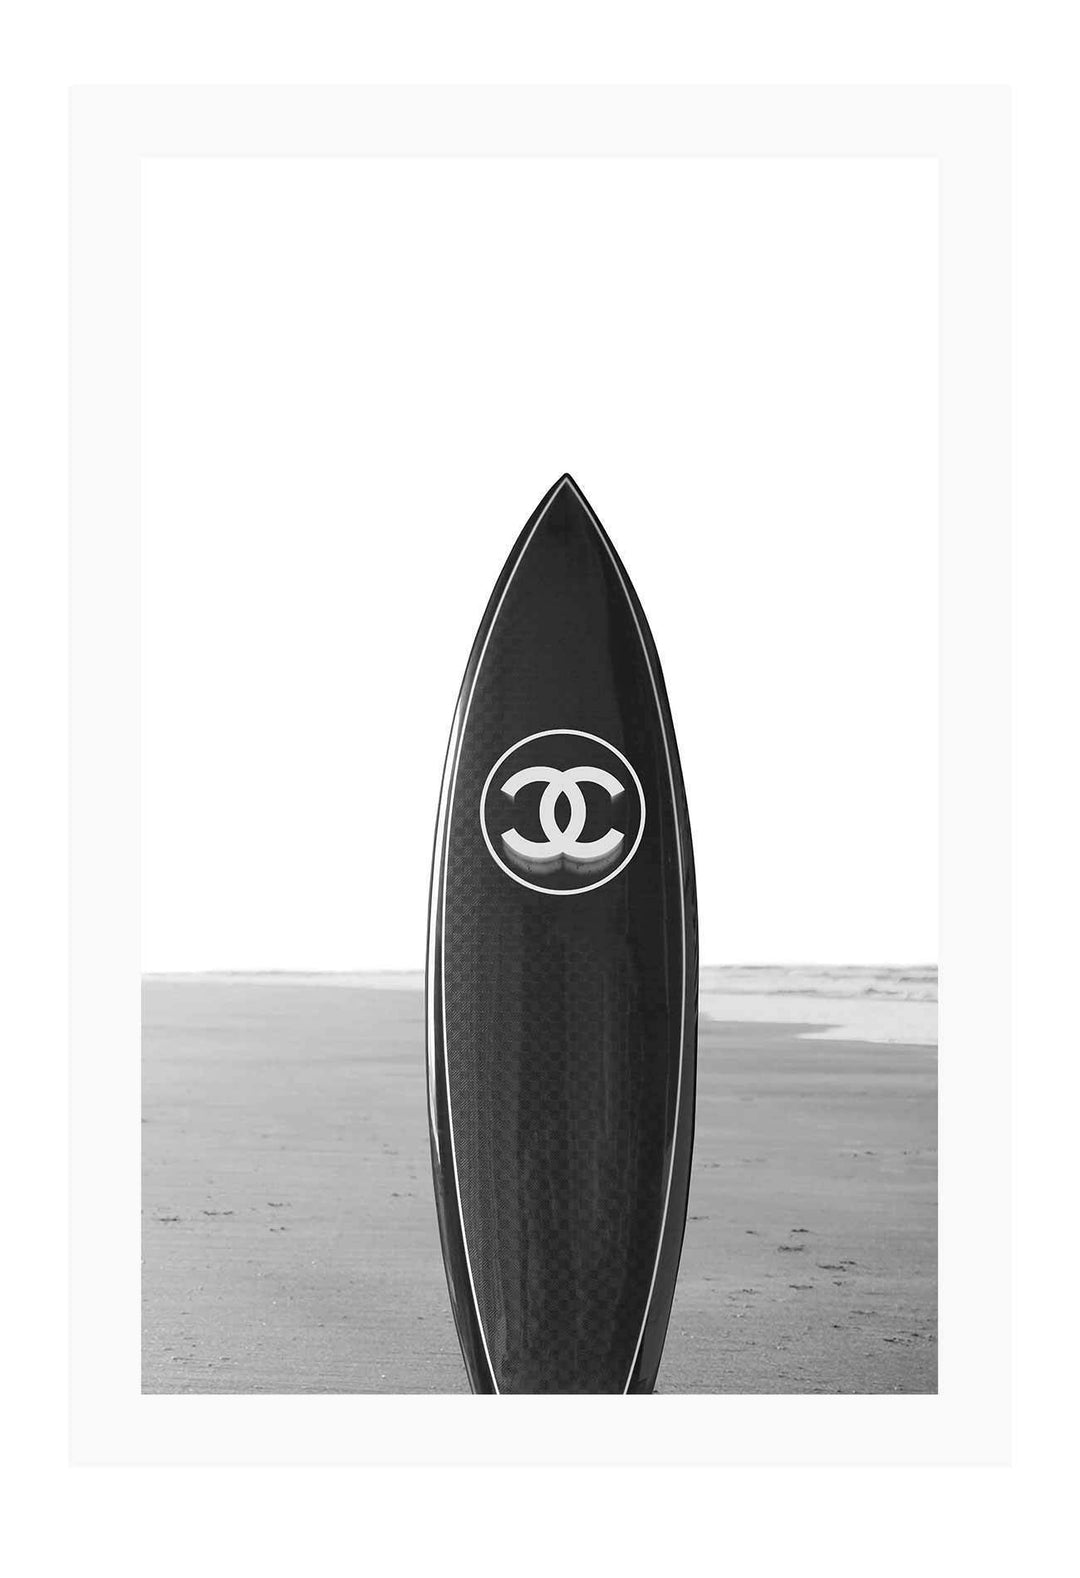 Canvas Print 60x90cm / Unframed Surf Luxe Surfe Luxe Wall Art : Ready to hang framed artwork. Brand